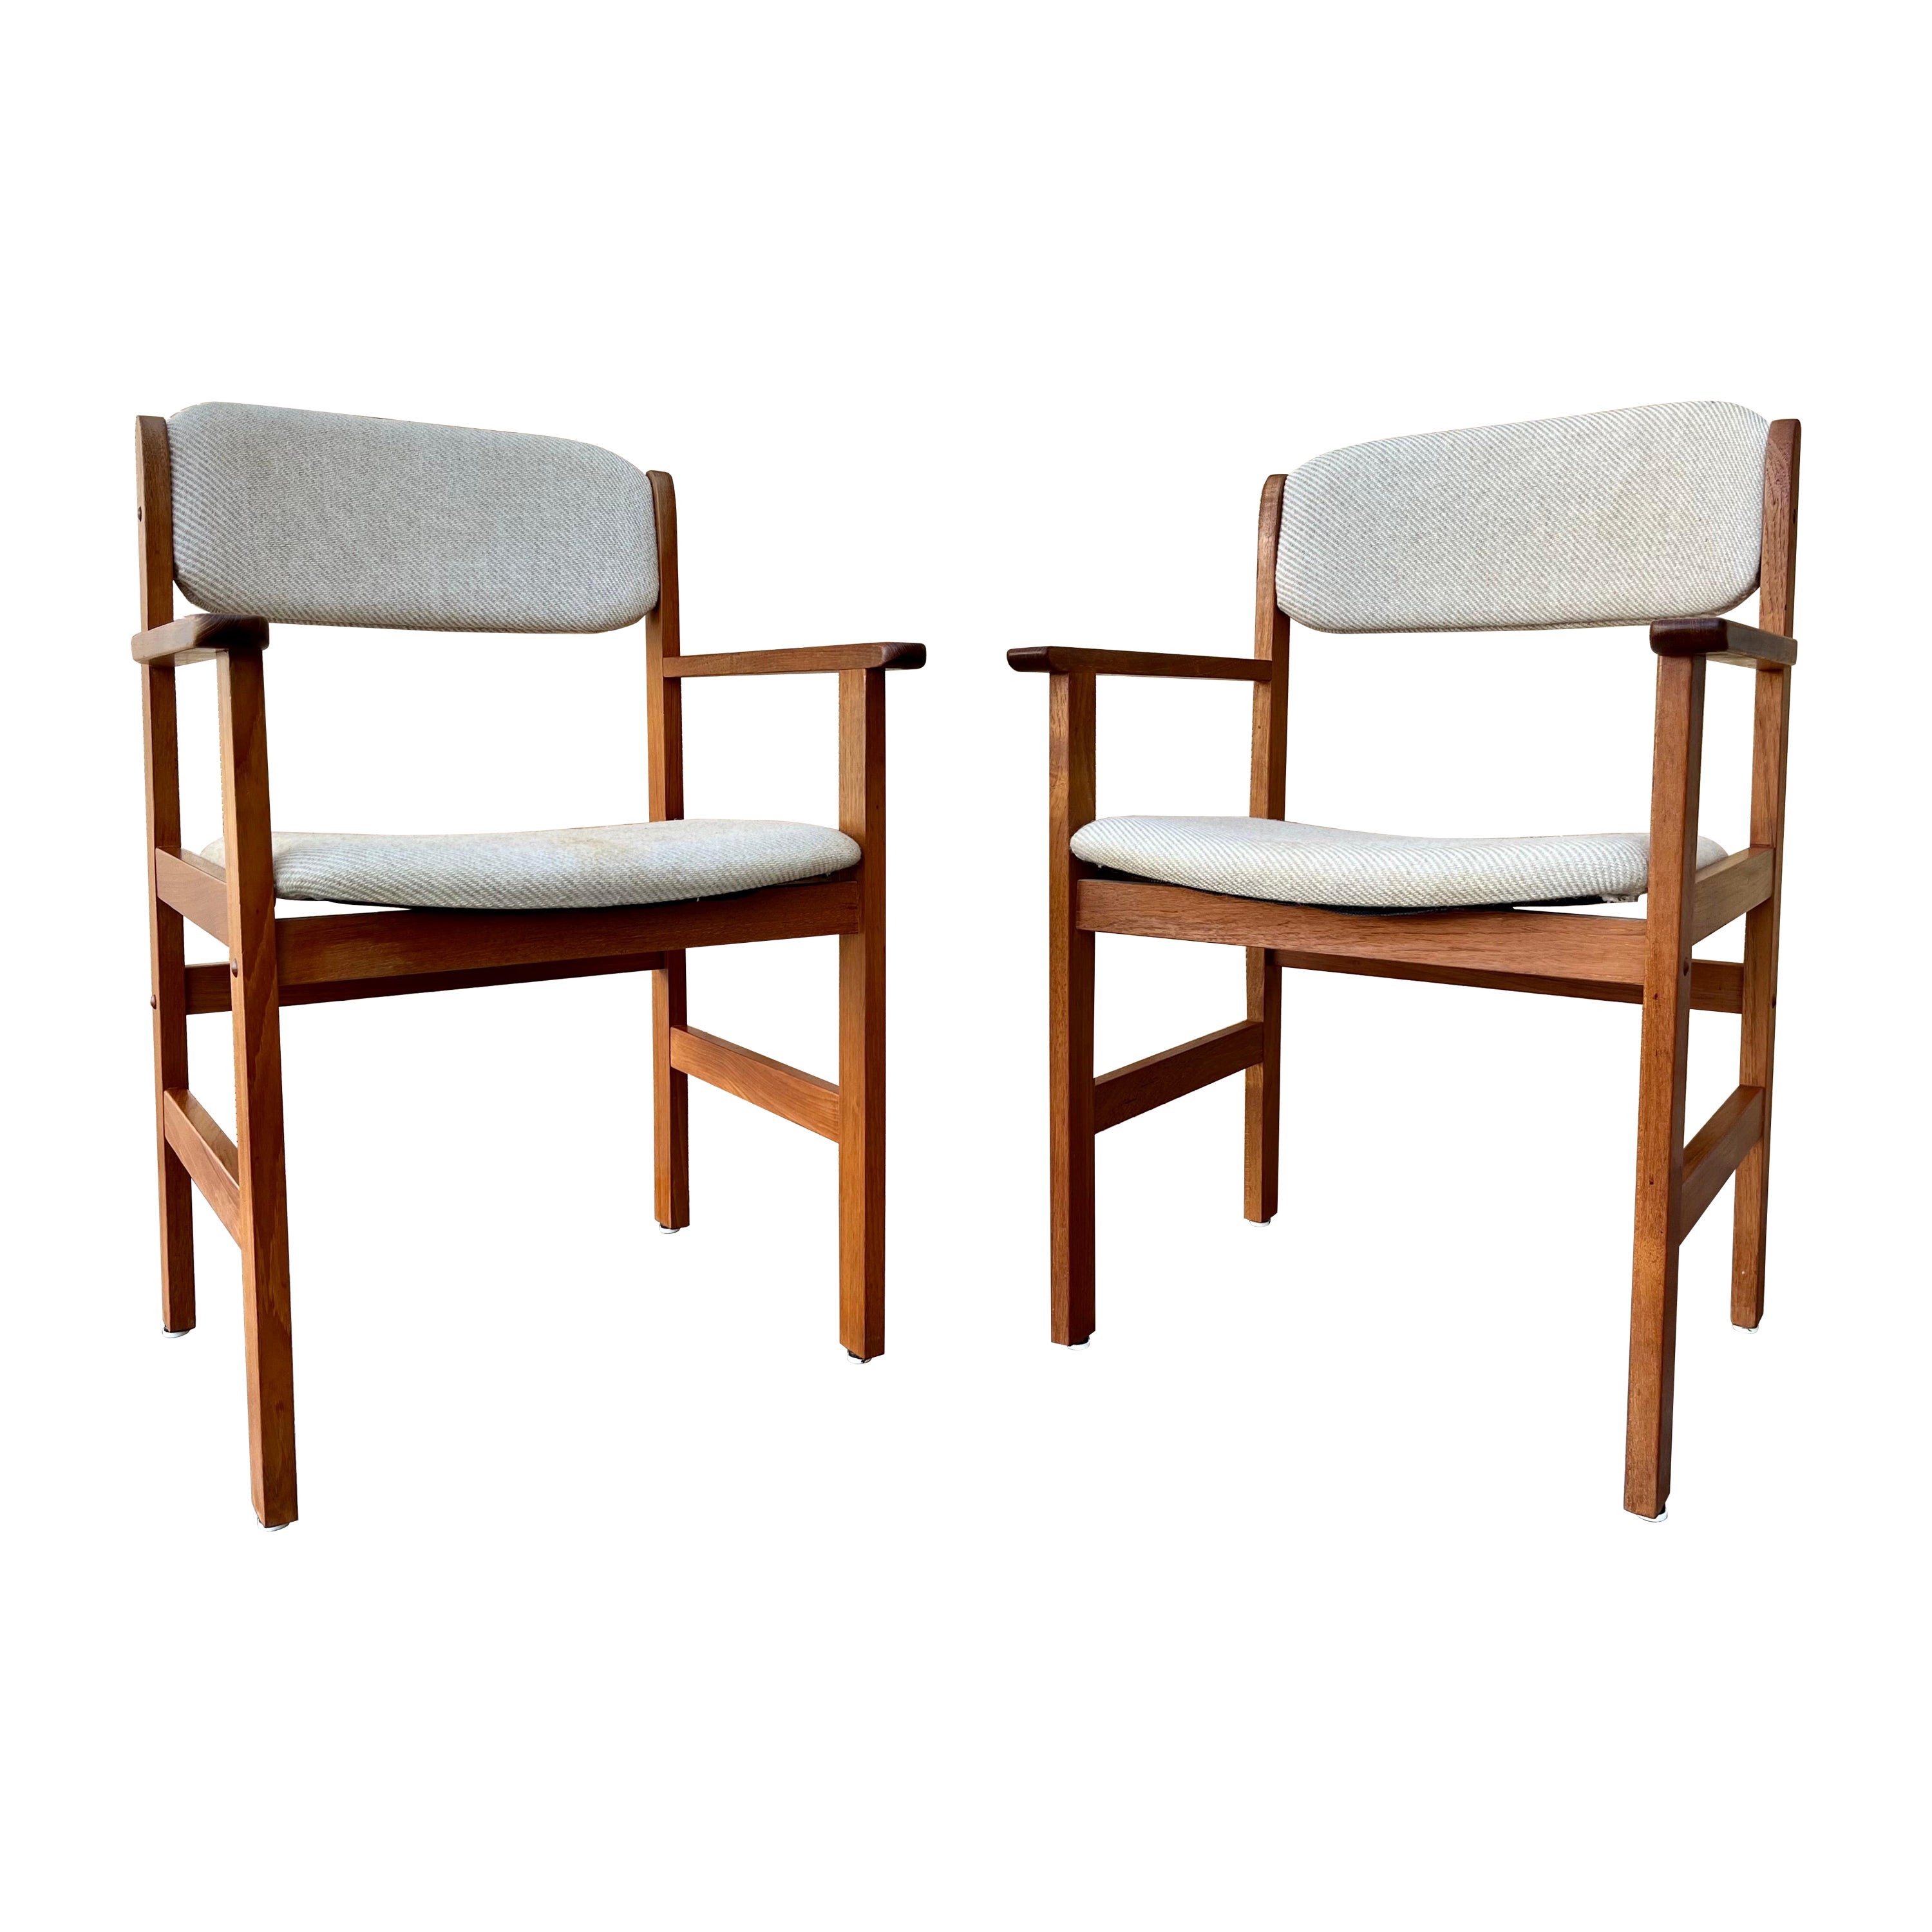 1980s Mid-Century Danish Modern Style Captain Chairs by Benny Linden Design.